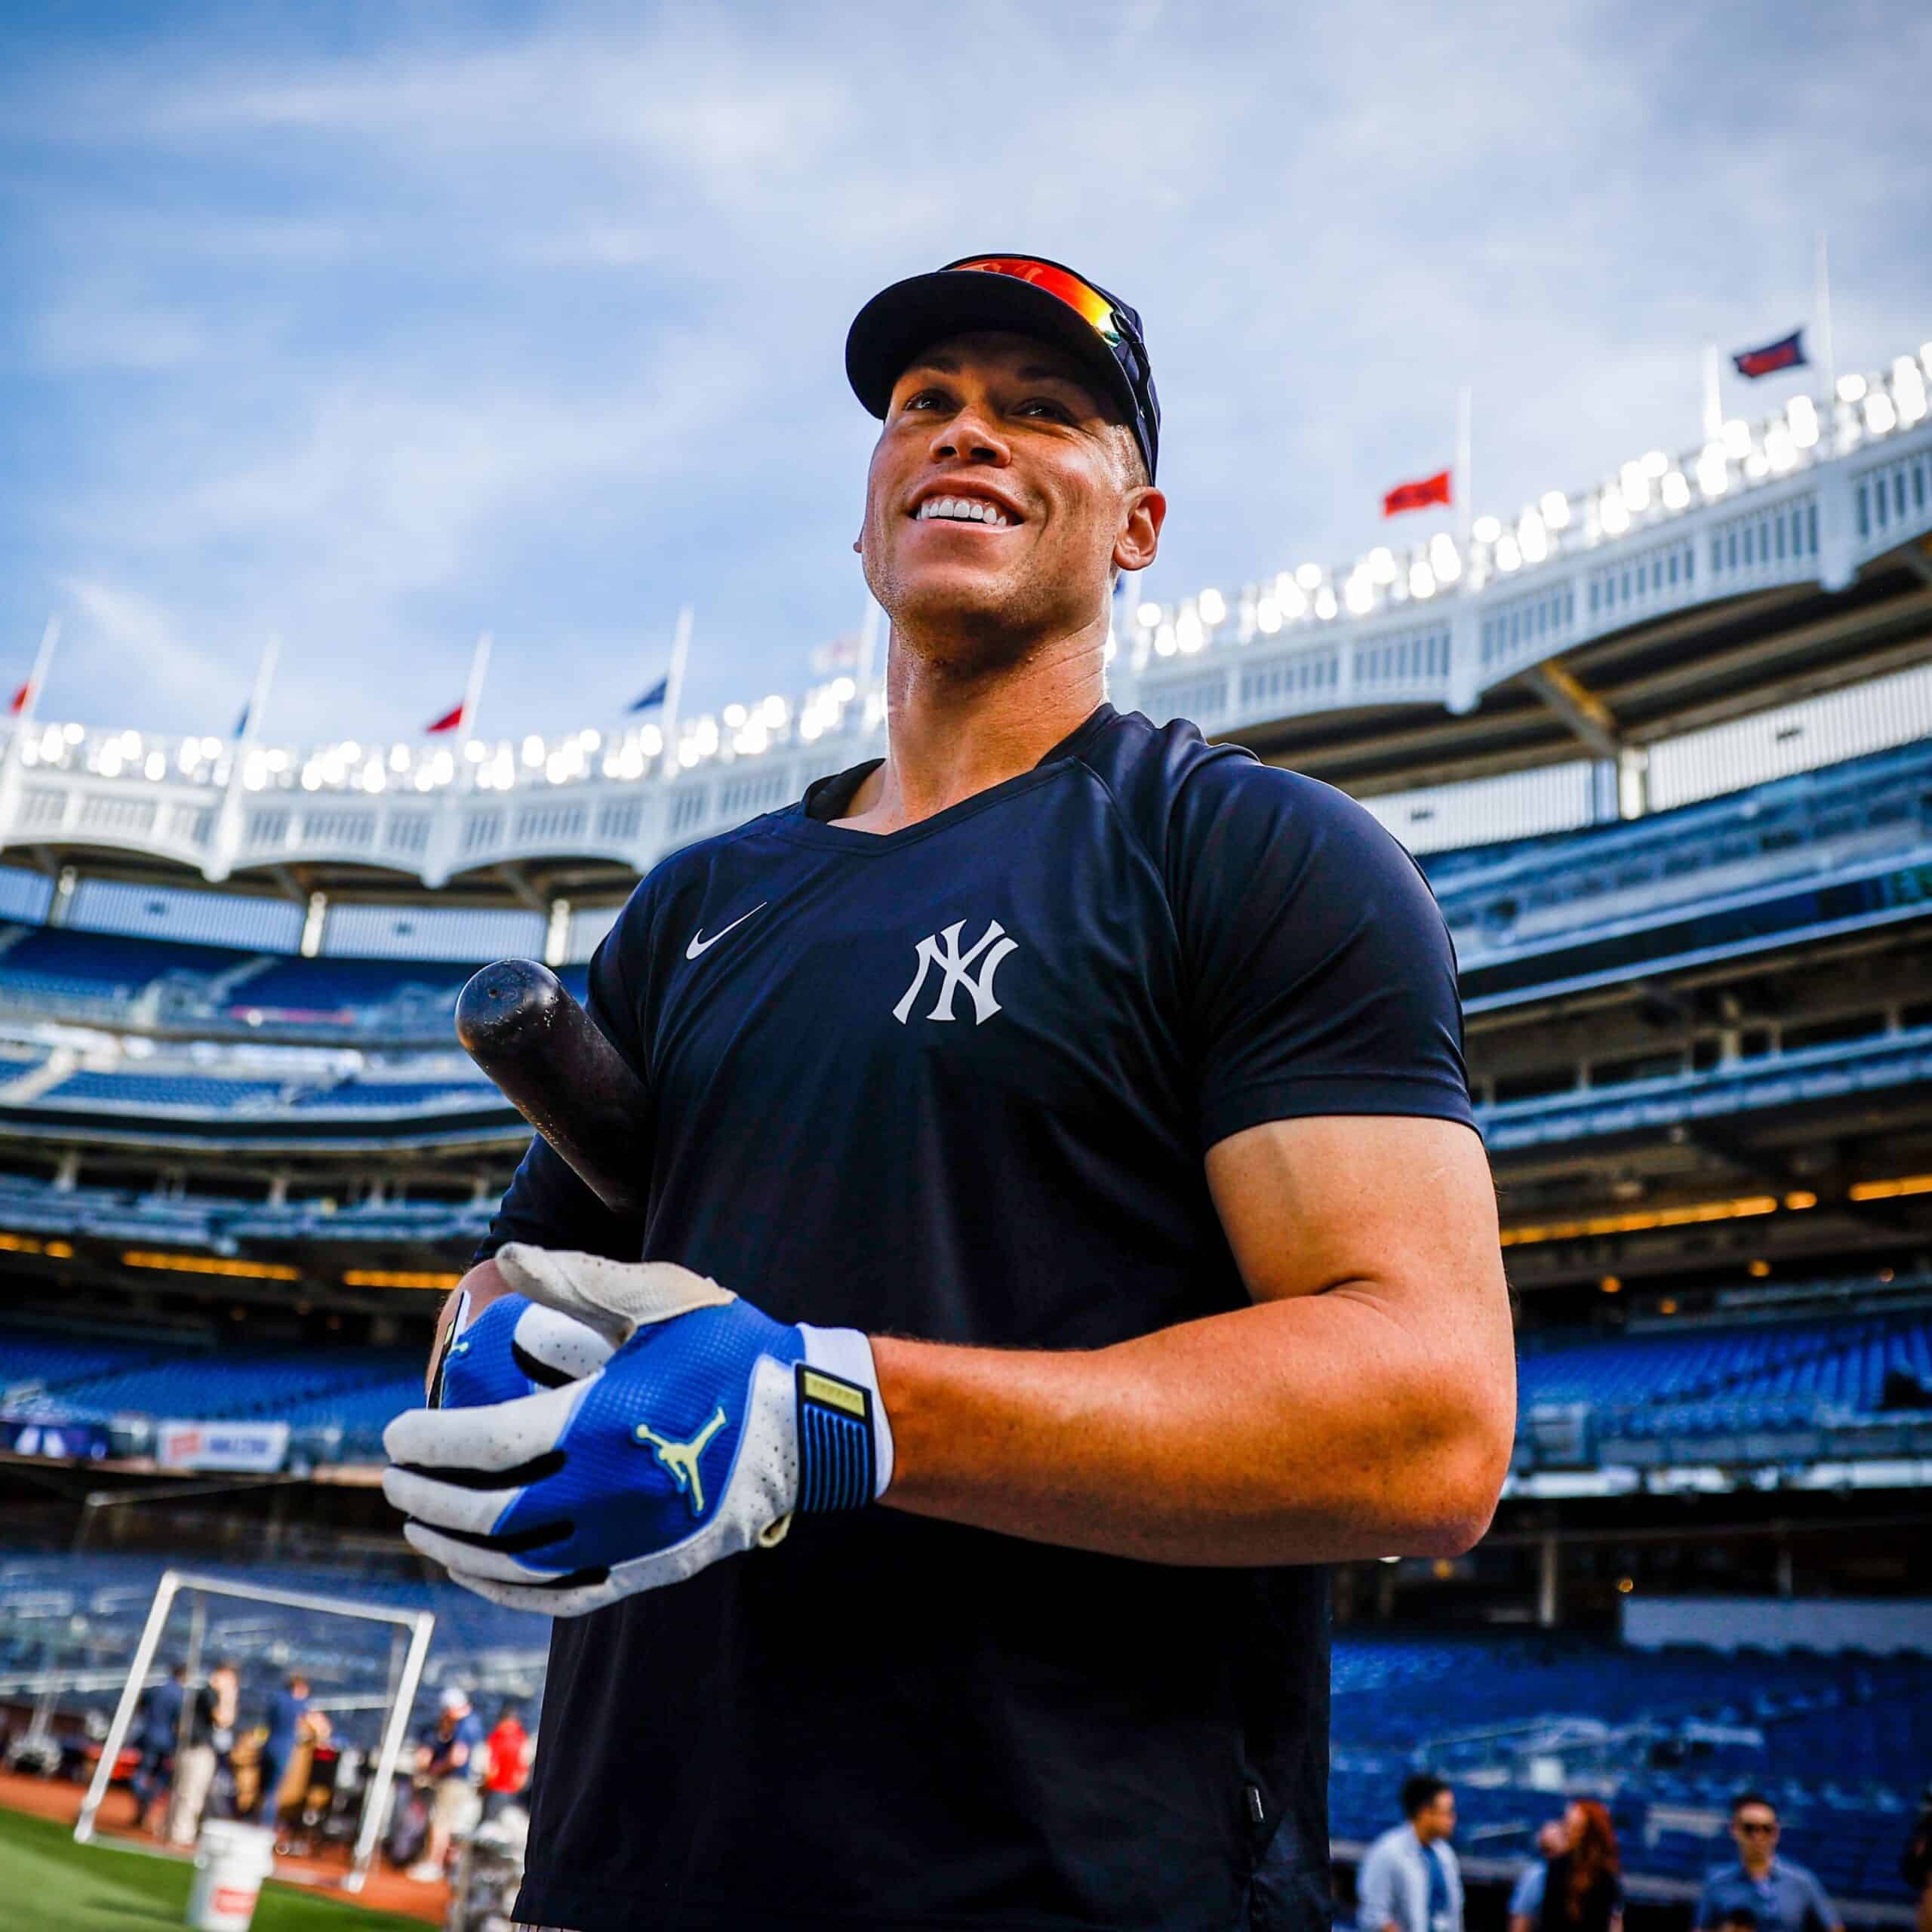 New York Yankees' Aaron Judge smiles after a home run by Yankees